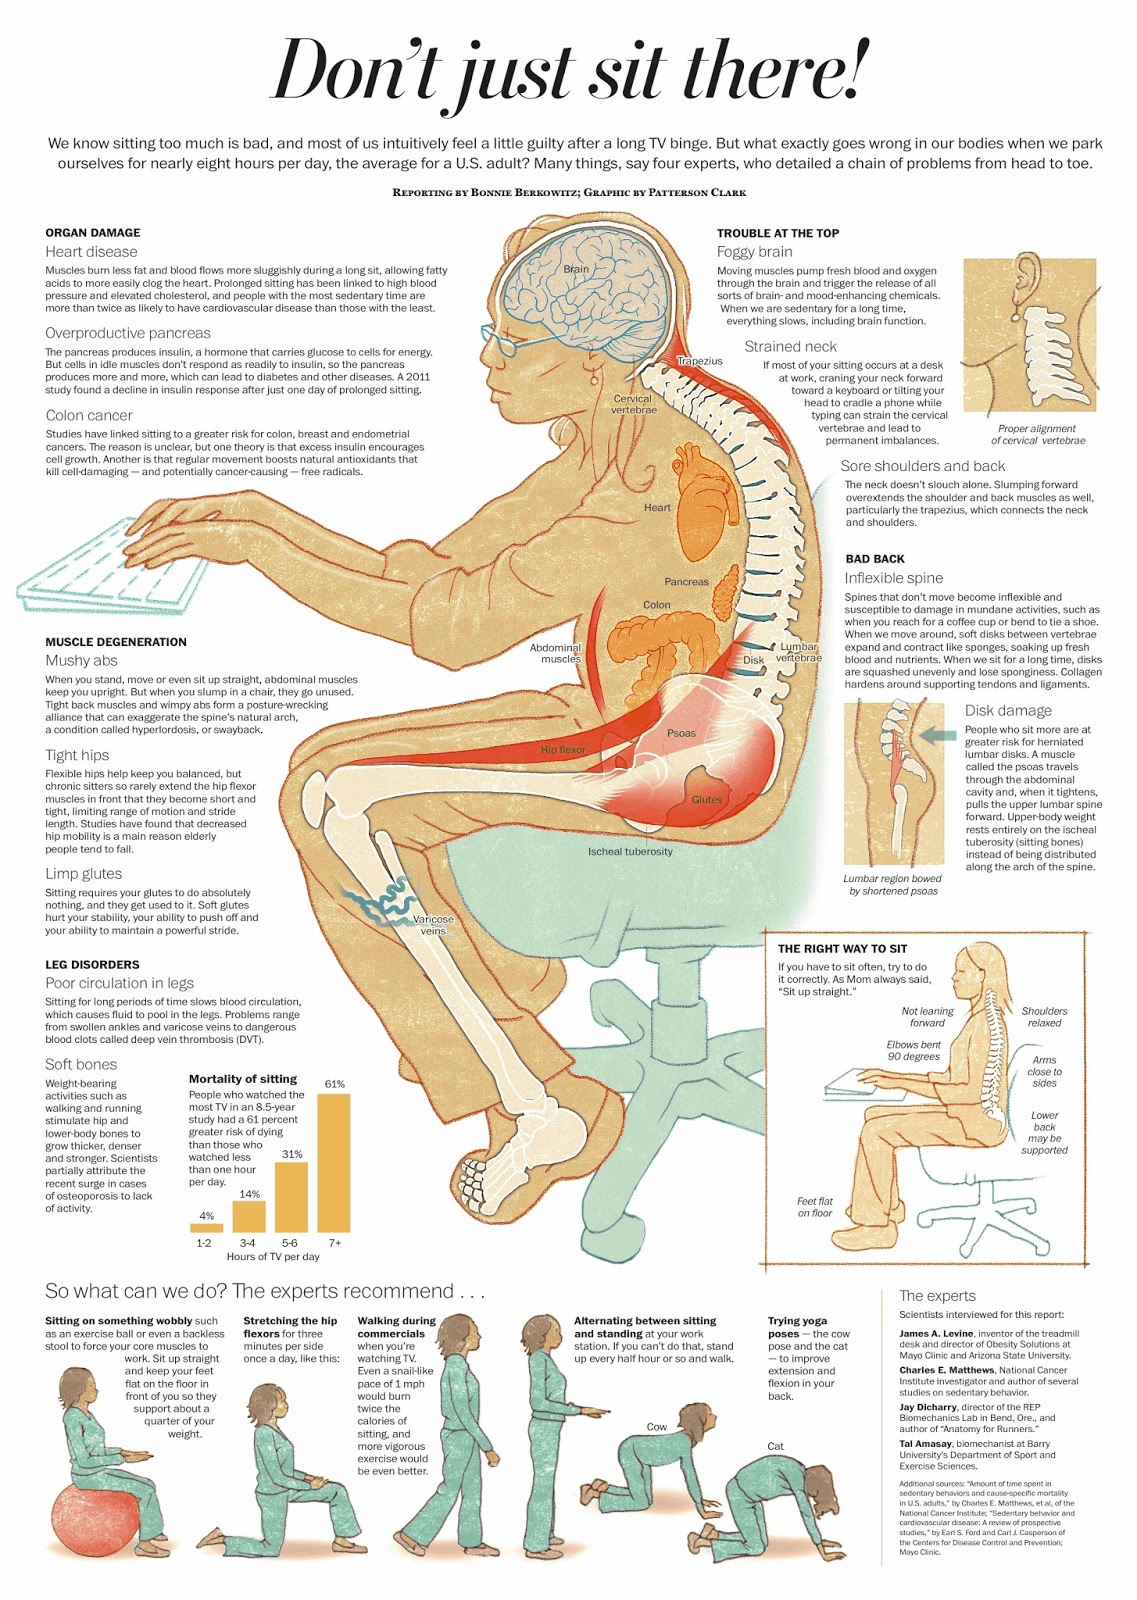 This Graphic Explains All The Health Hazards Of Sitting For Too Long